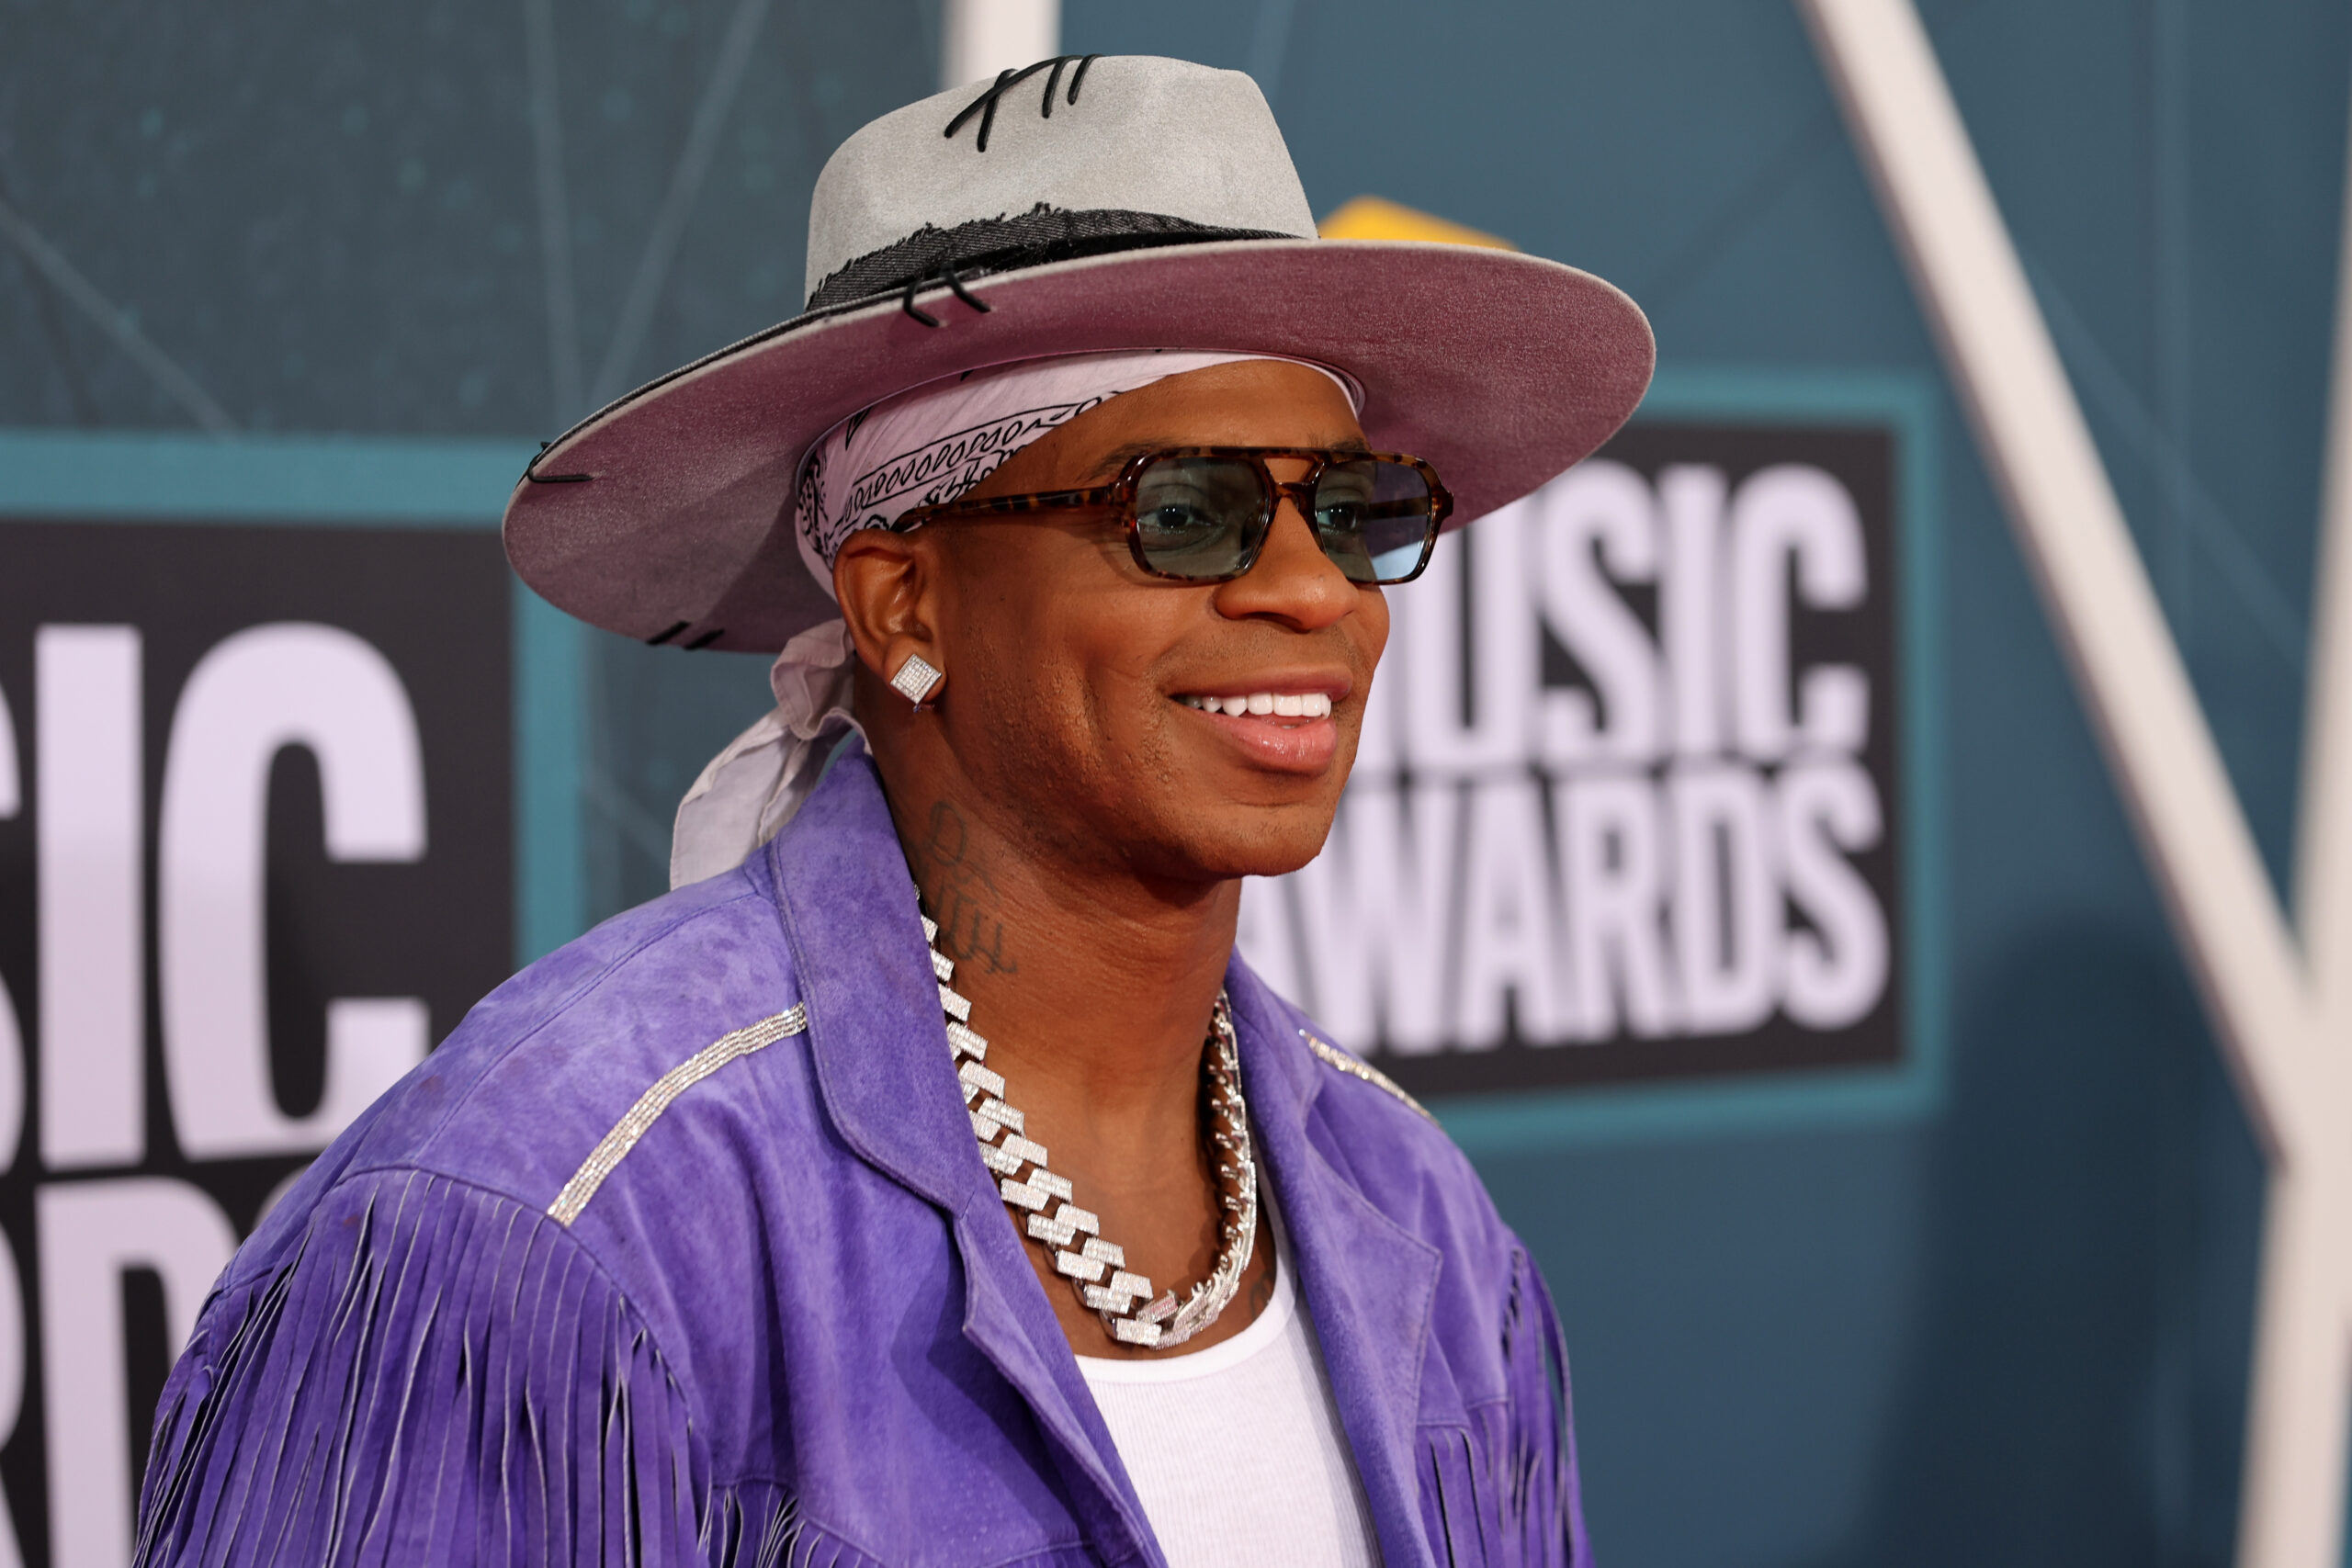 Jimmie Allen Opens Up About Mental Health in New Untitled Song (Listen)